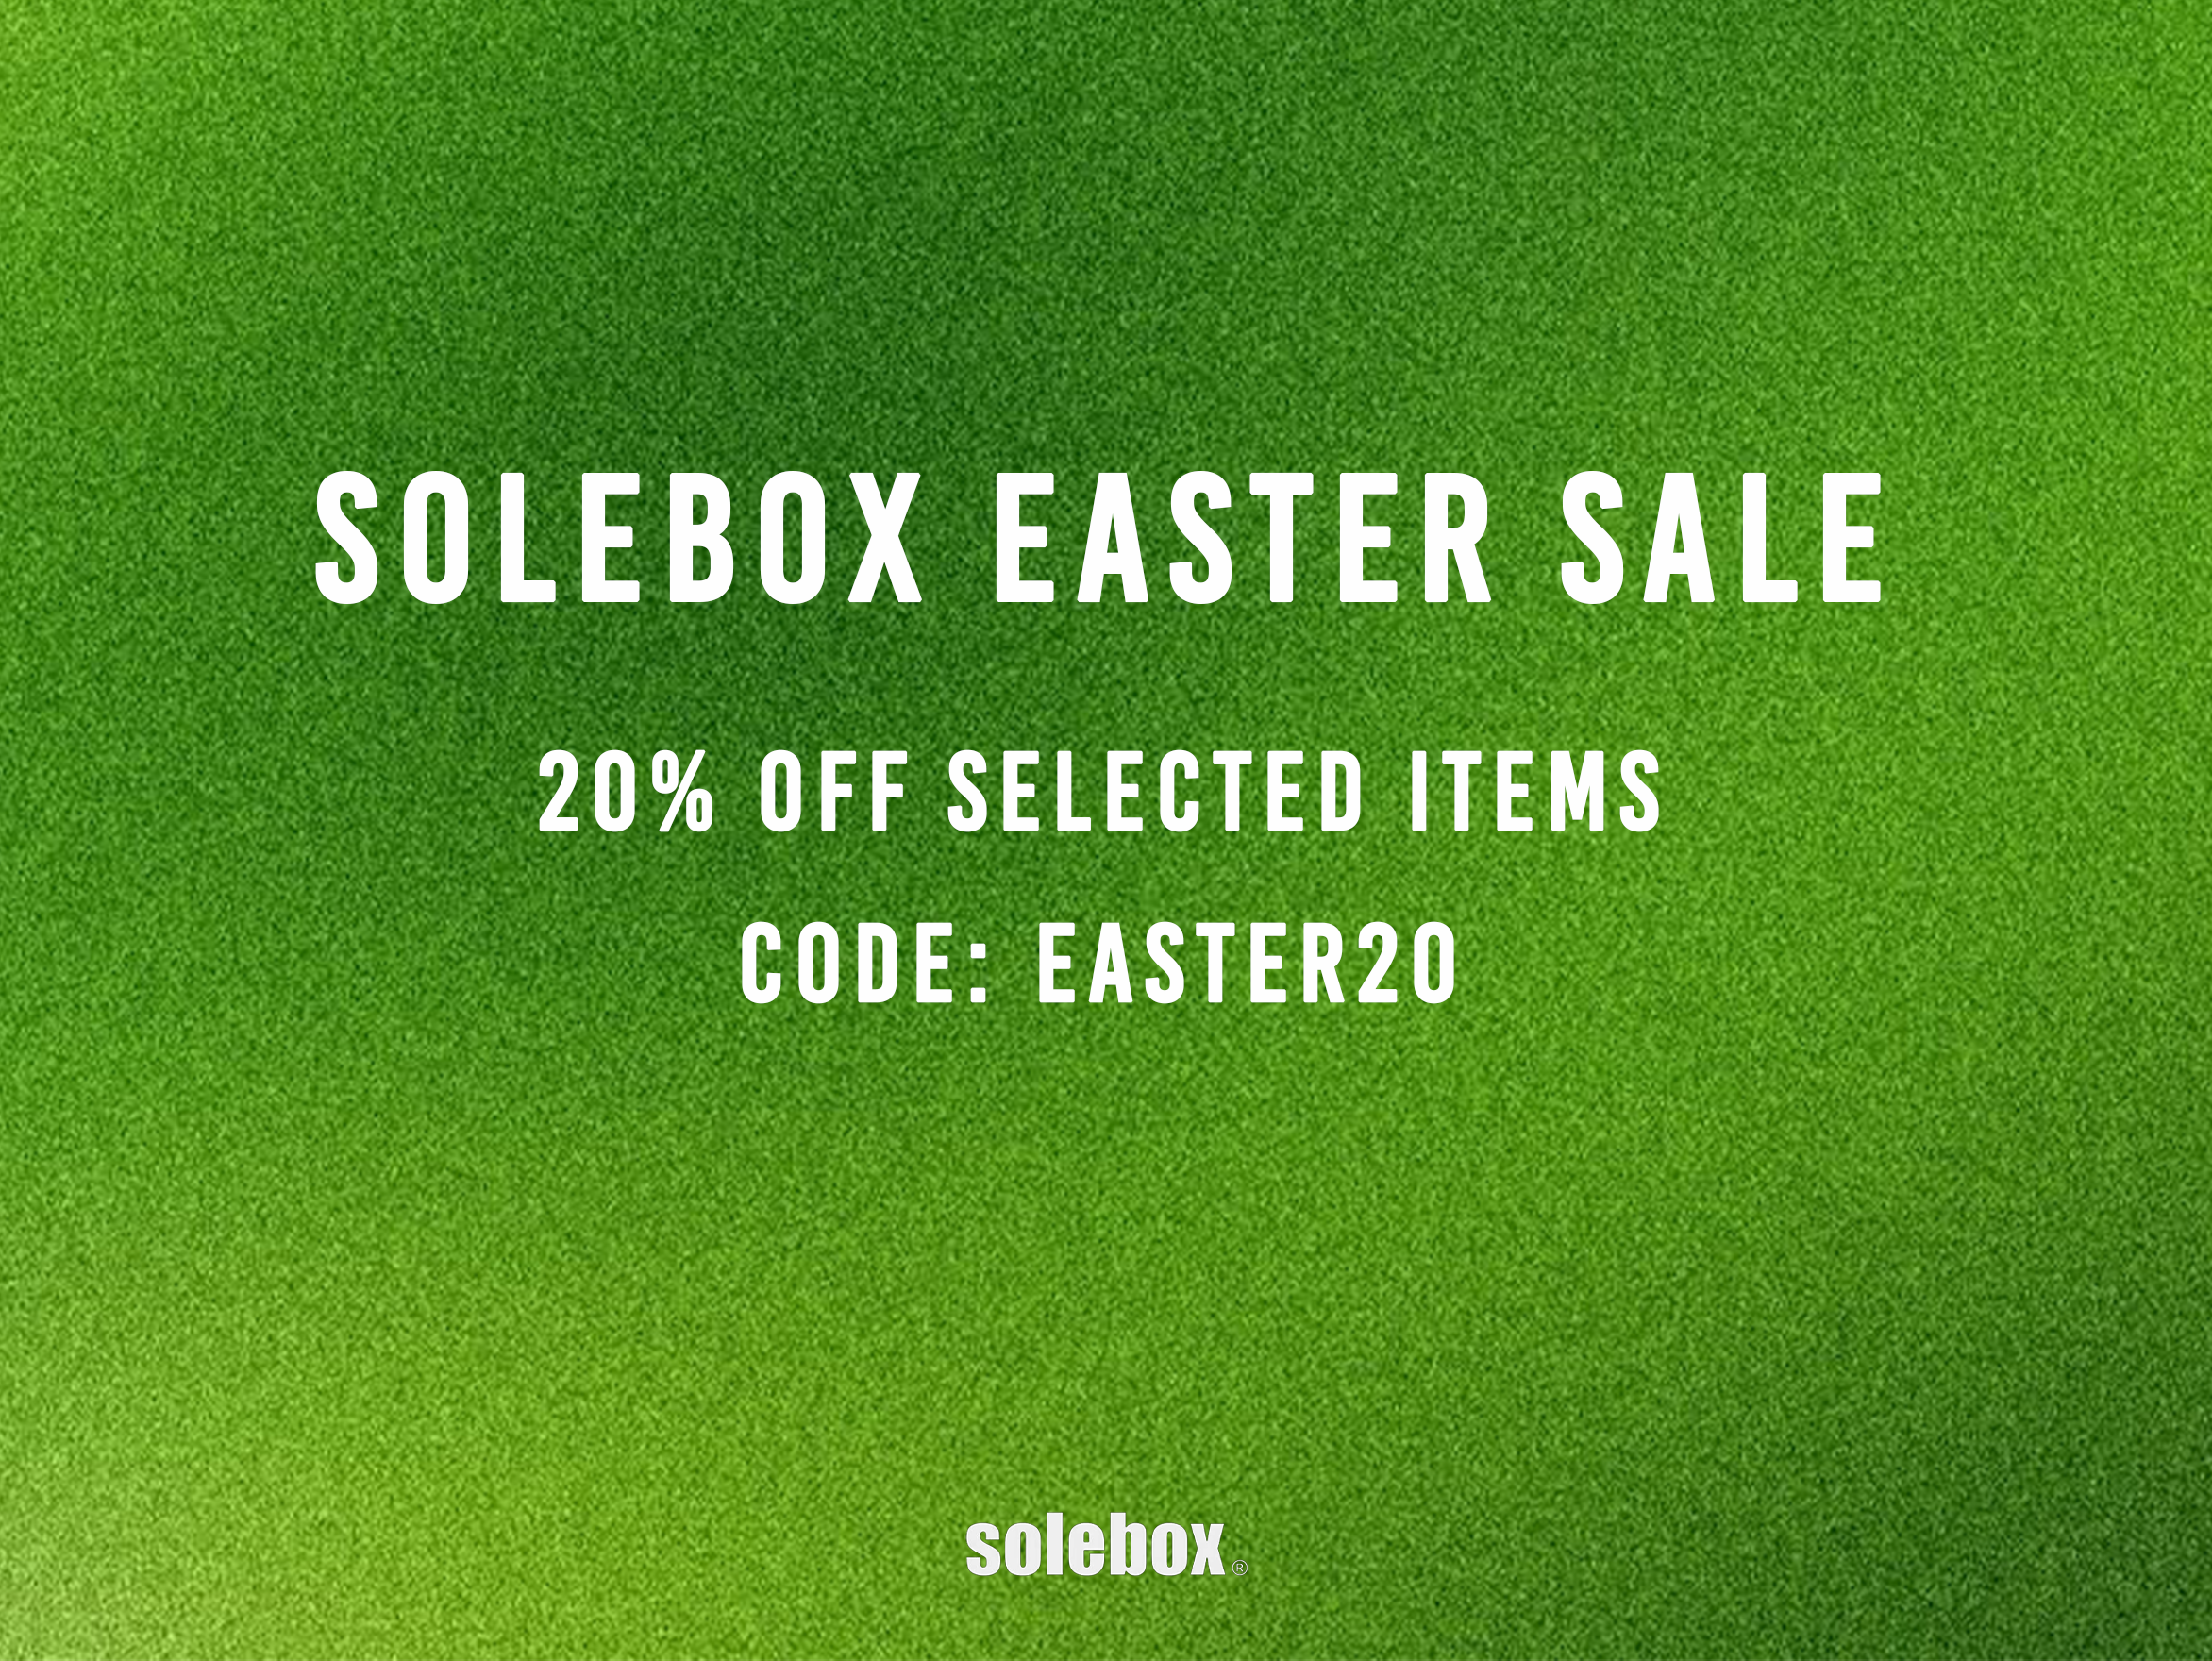 Solebox Easter Sale - 20% off selected pieces